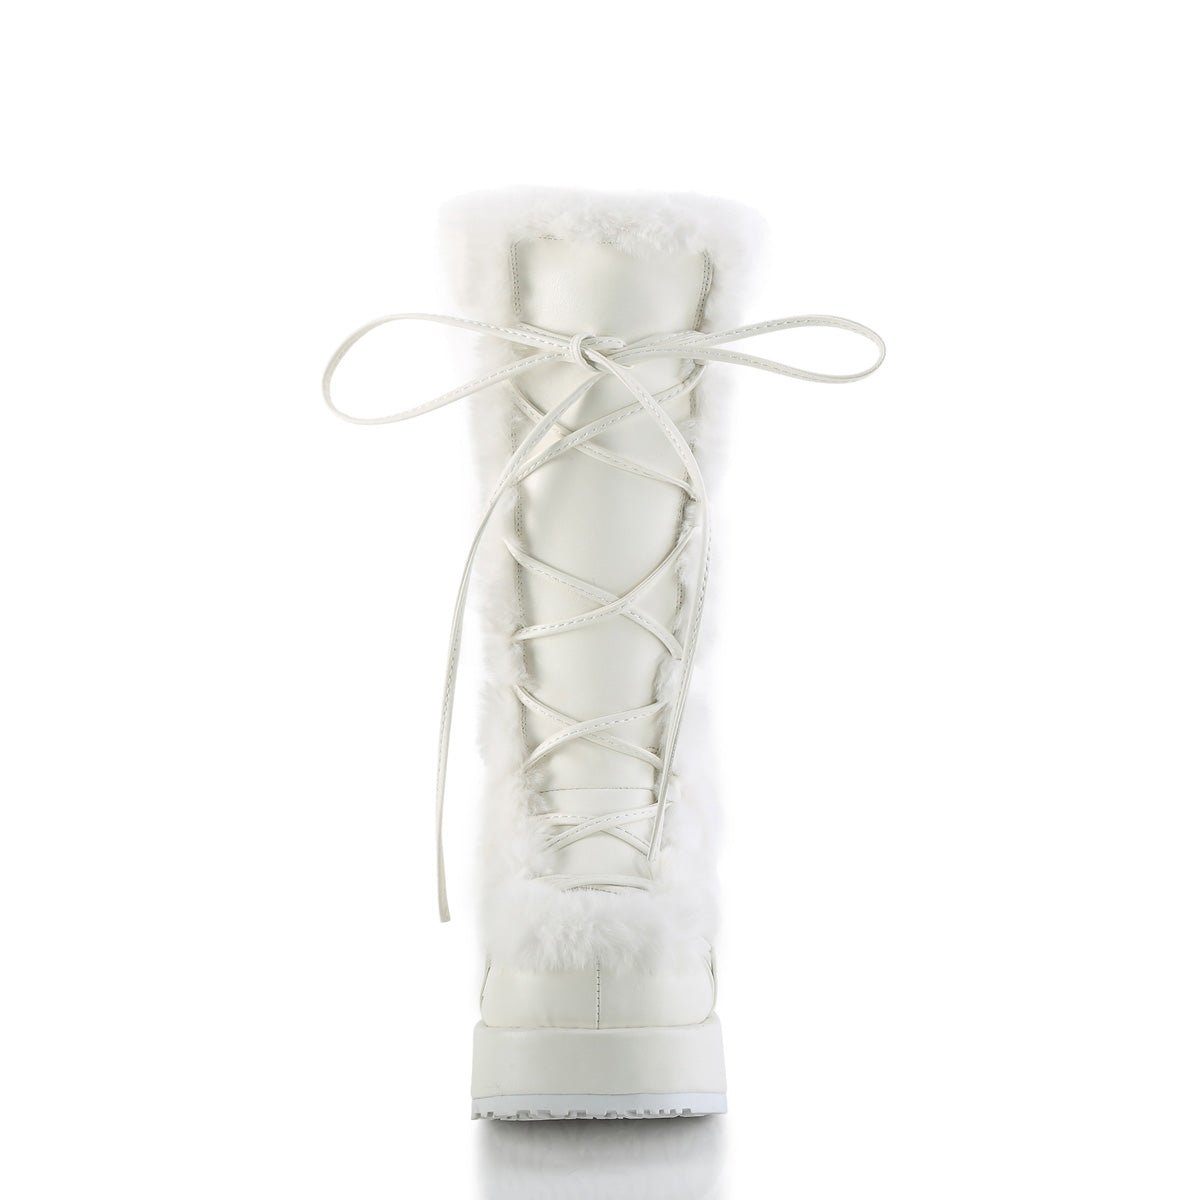 Too Fast | Demonia Cubby 311 | White Vegan Leather Women's Mid Calf Boots